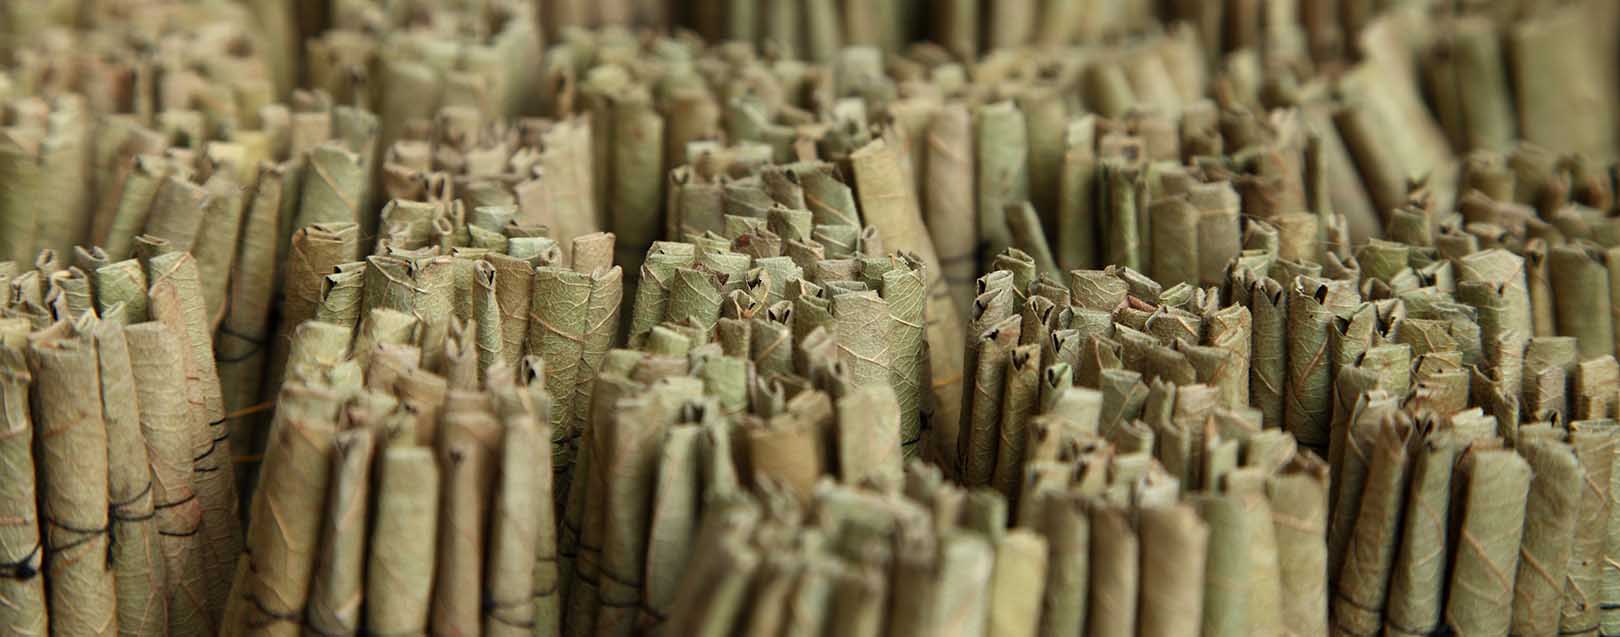 Beedi makers stop production!